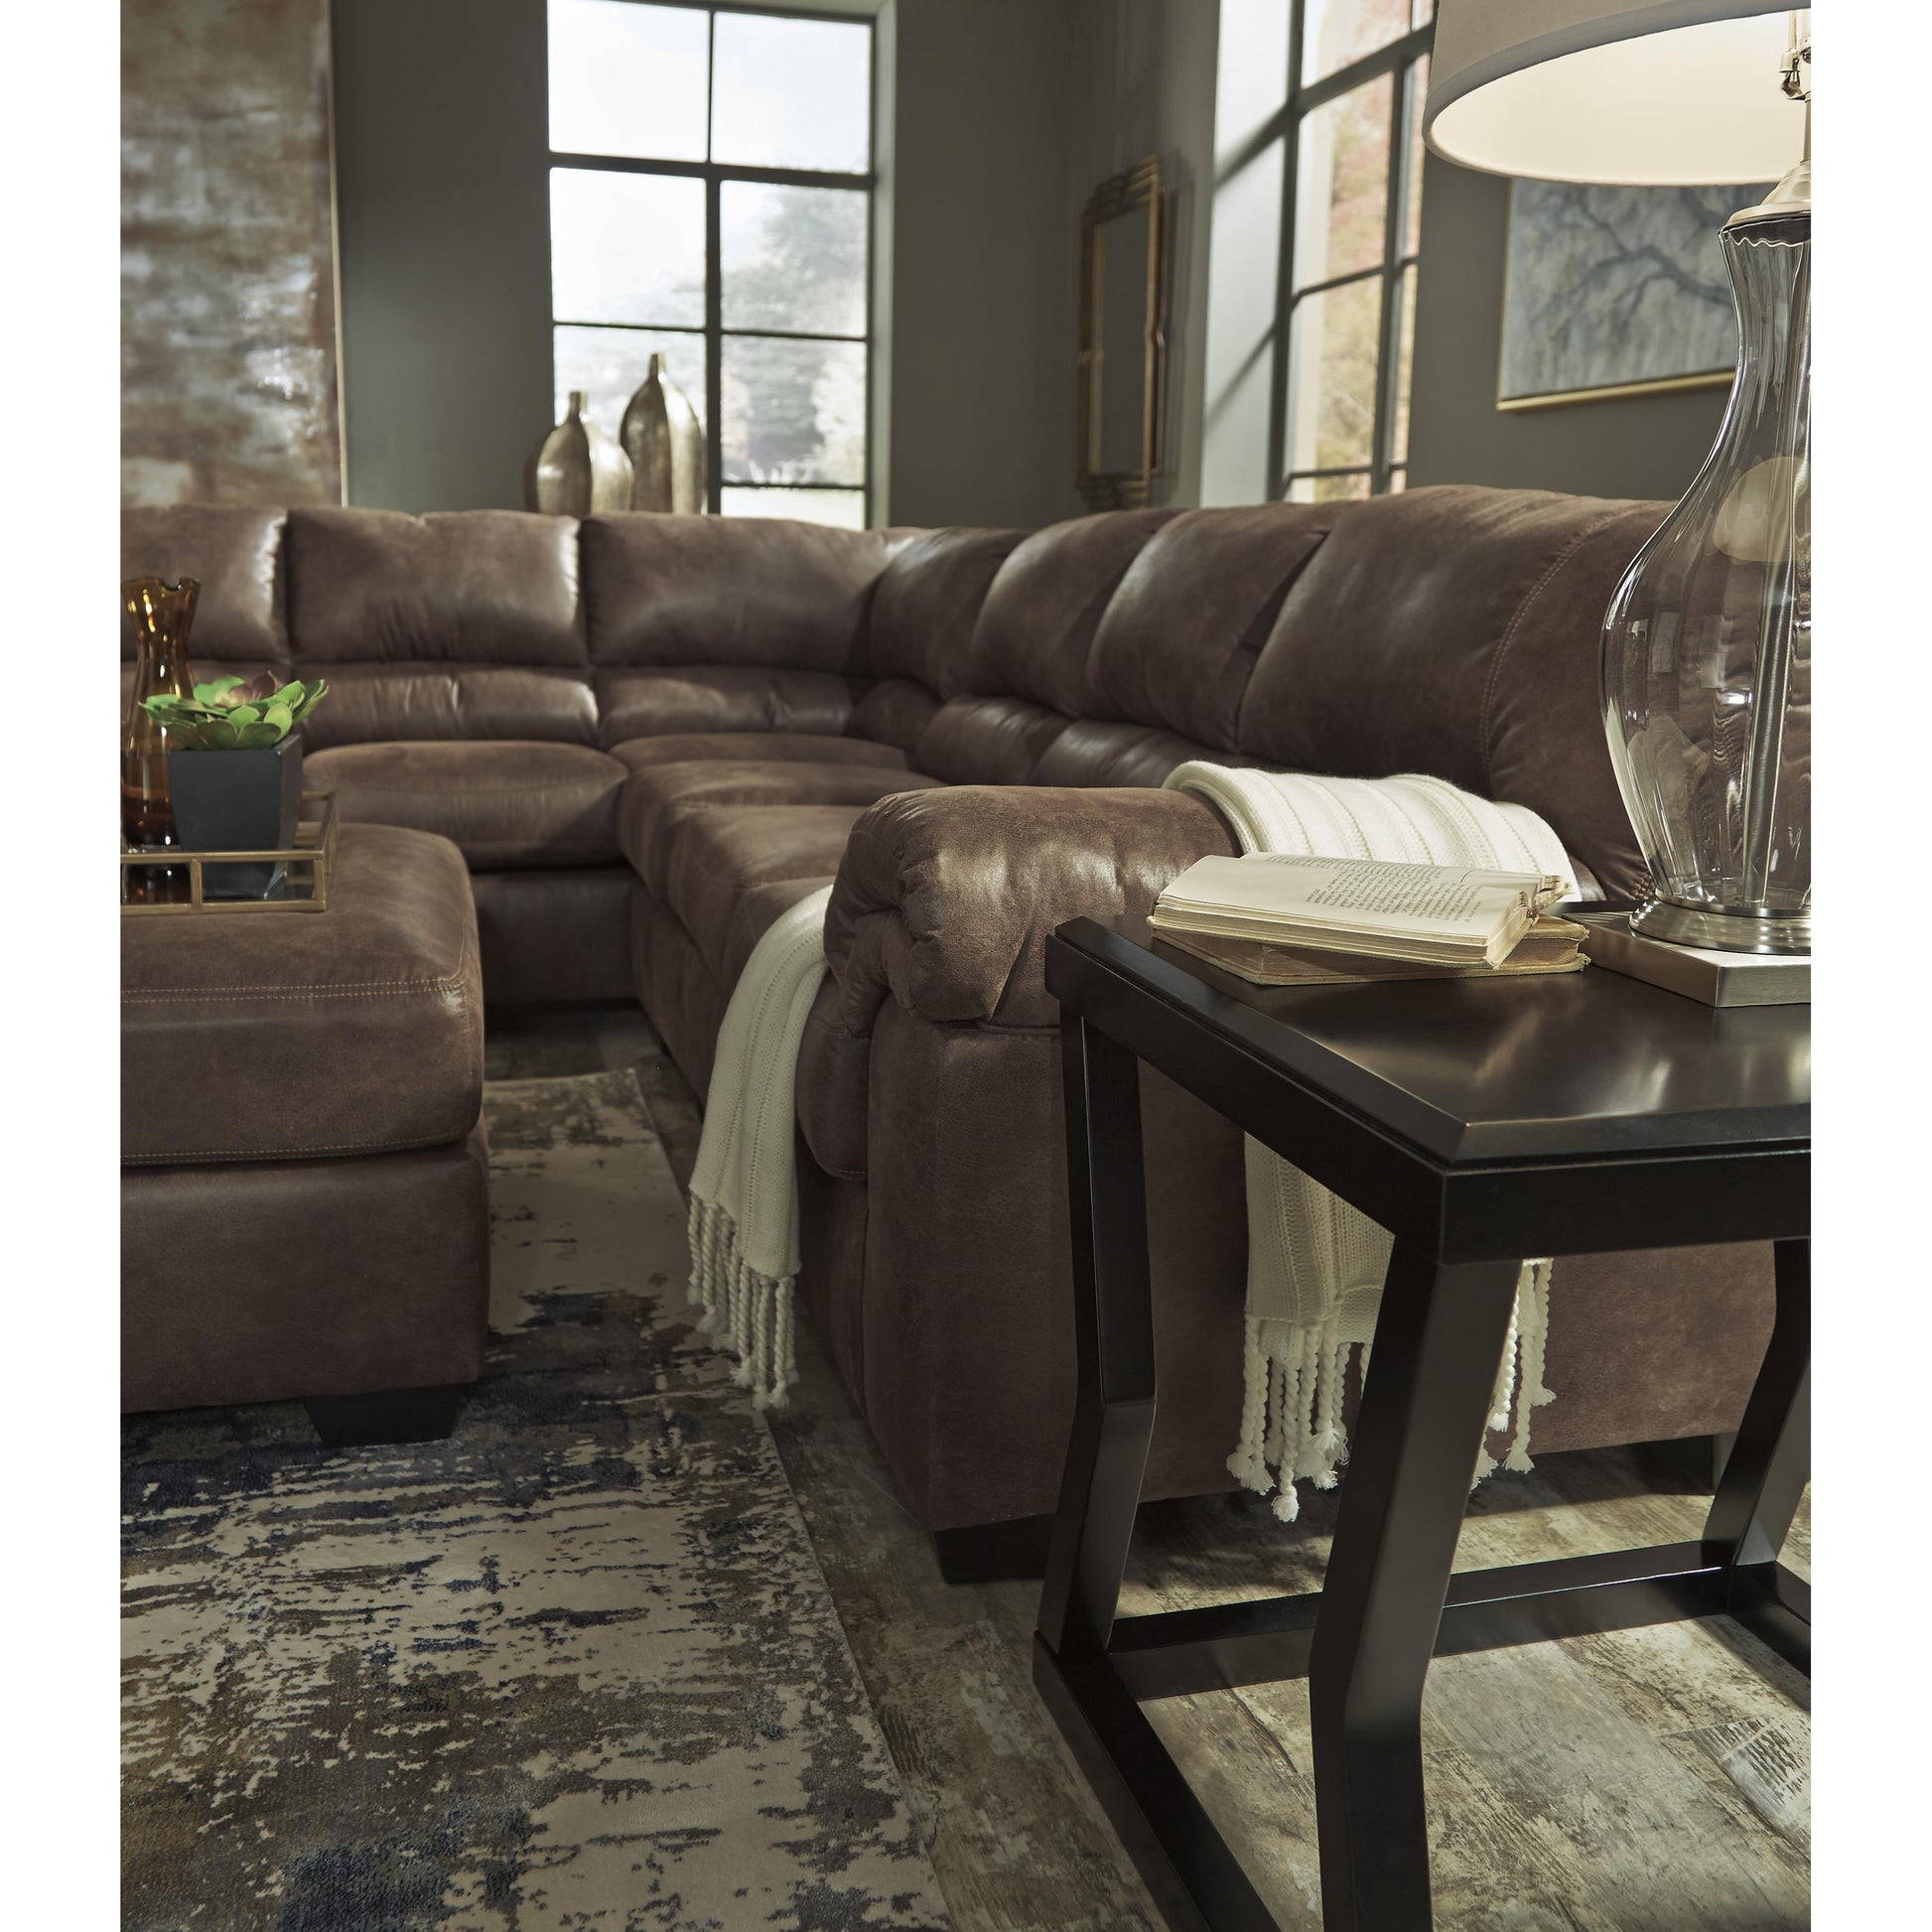 Signature Design by Ashley Bladen Leather Look 3 pc Sectional 1202066/1202046/1202056